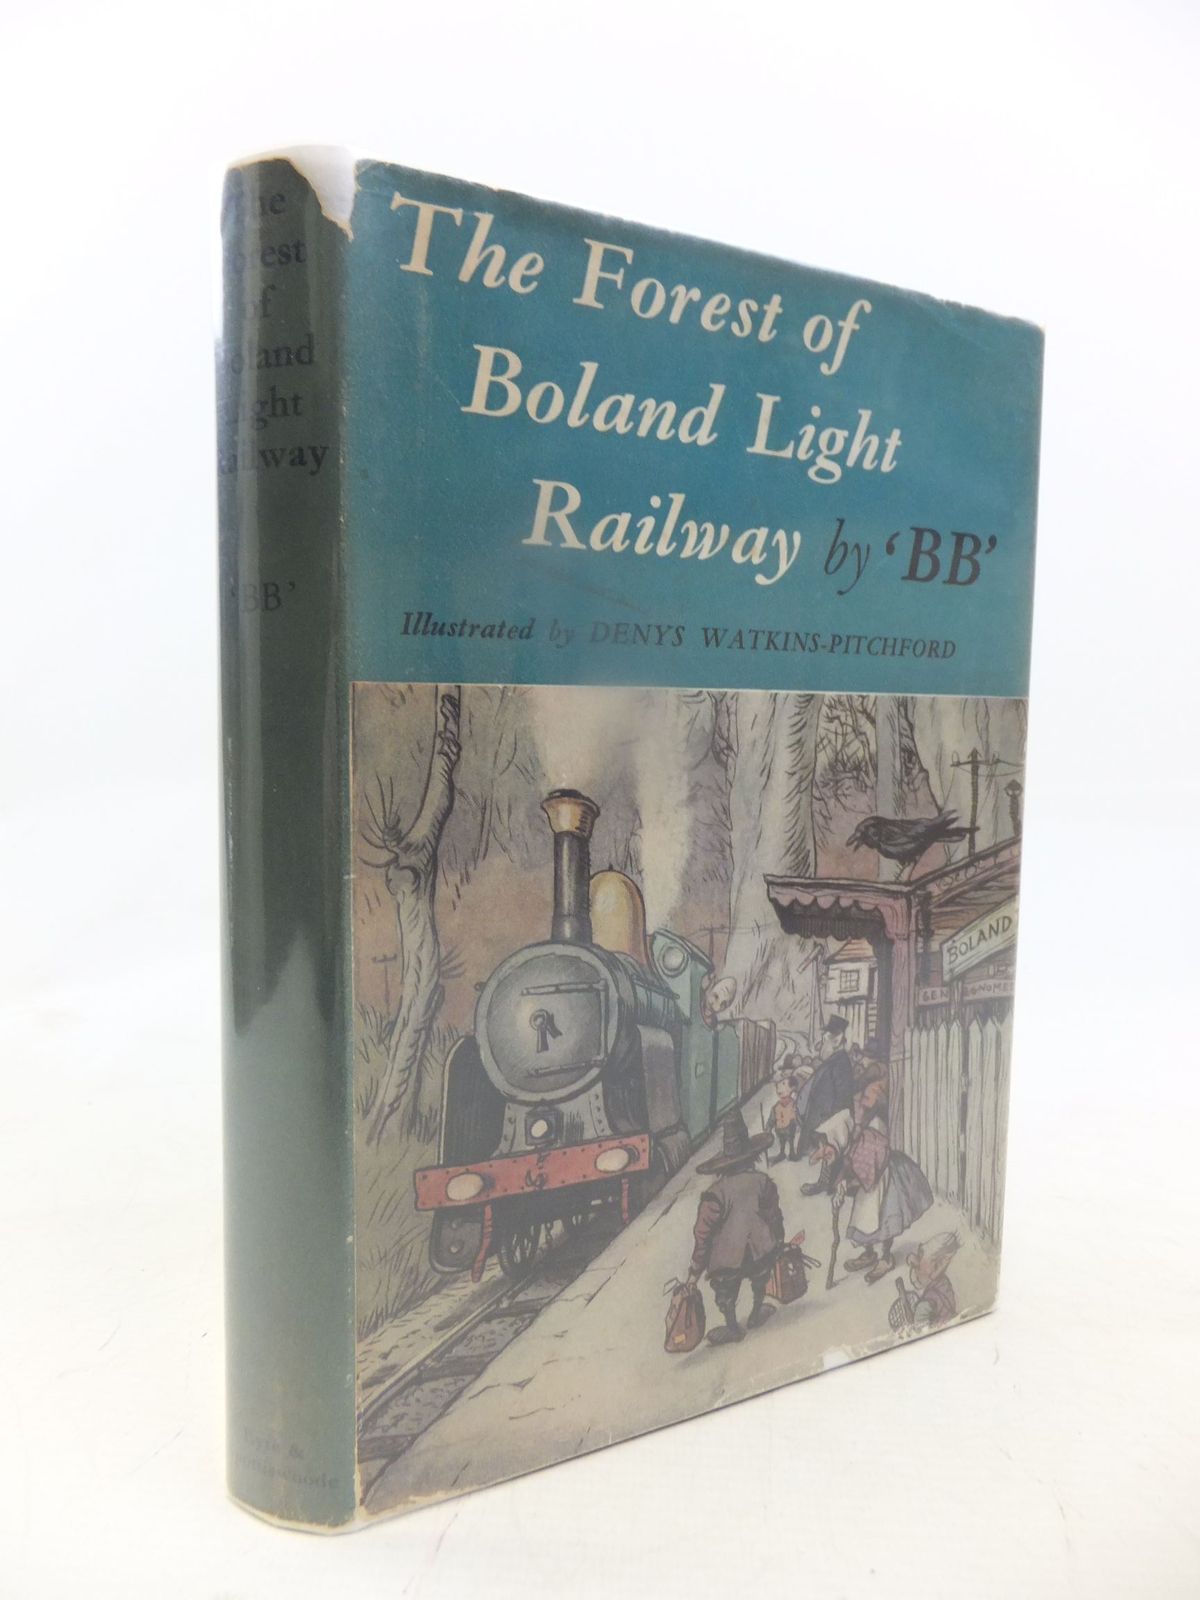 The Forest Of Boland Light Railway